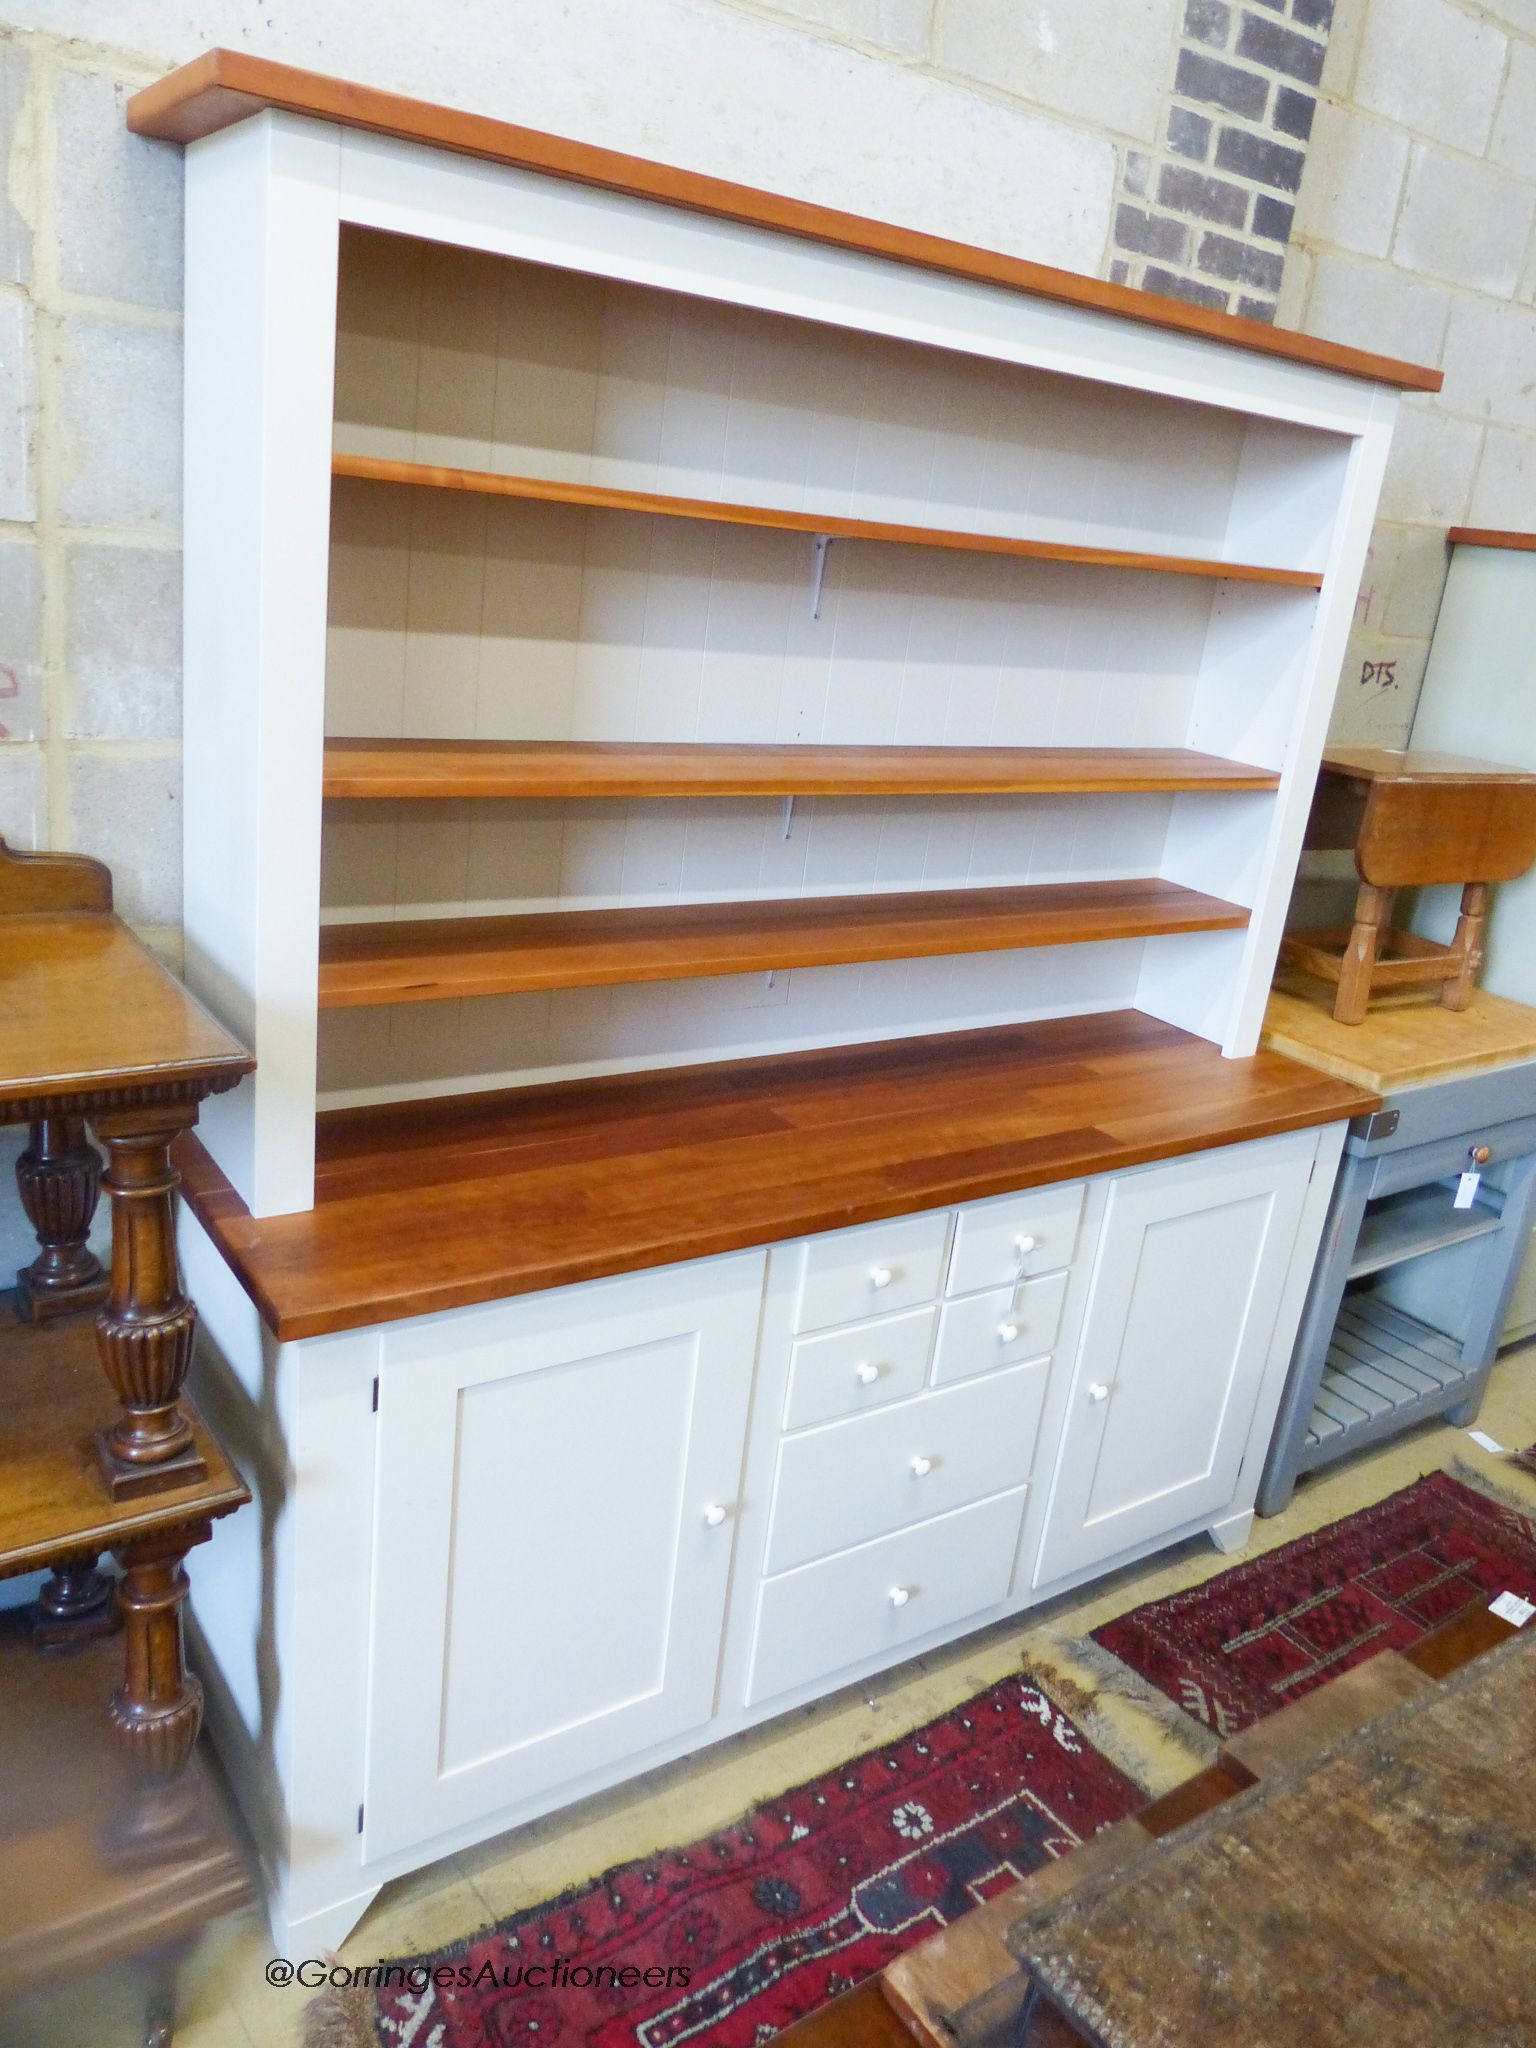 A white painted kitchen dresser, with pine top and shelves, length 182cm, depth 51cm, height 192cm